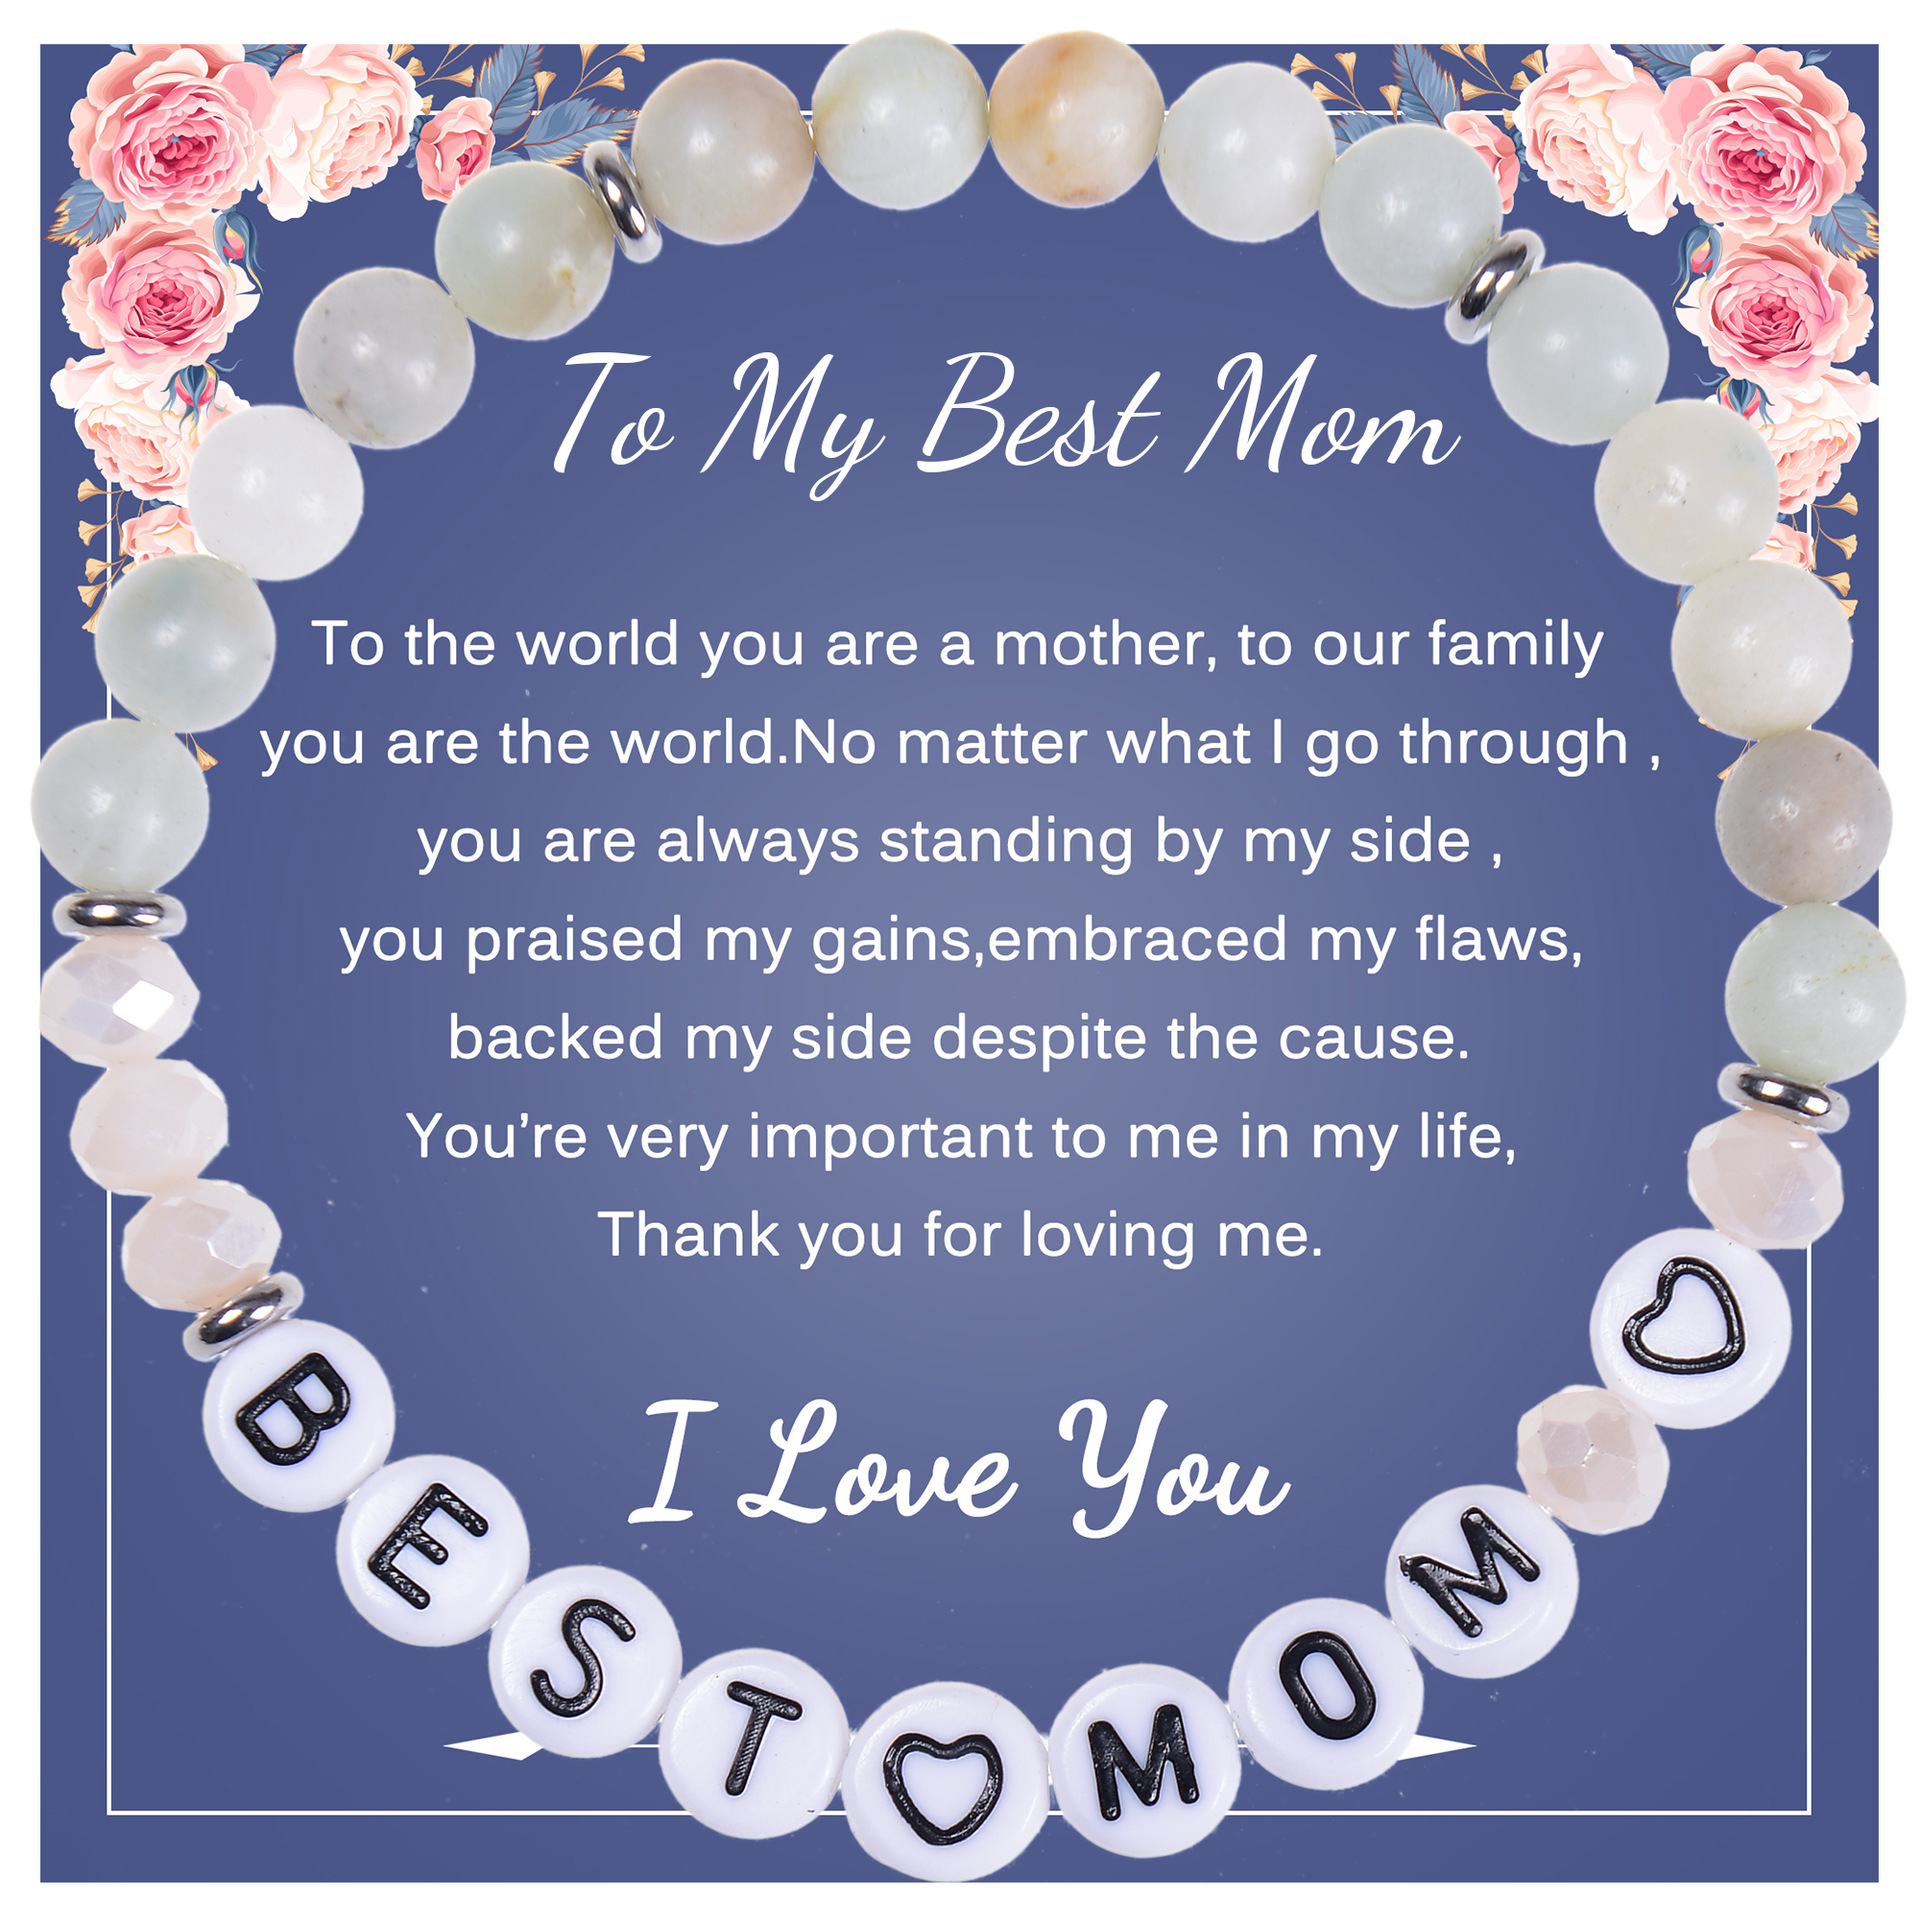 1:To My Best Mom